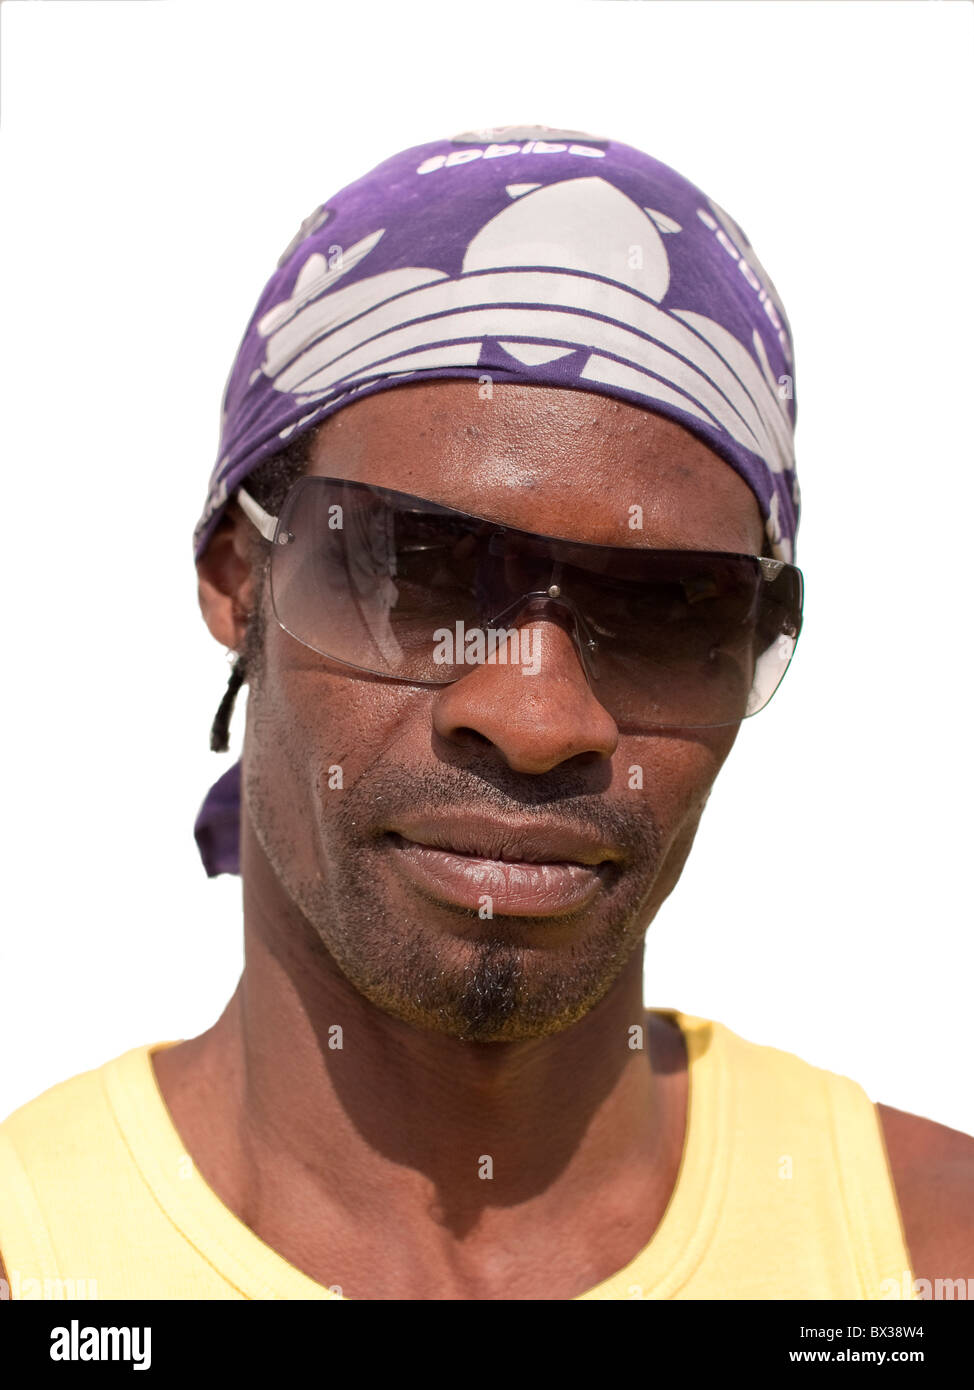 Booma age 40 from Leeds, Black male Afro-Caribbean wearing yellow T shirt and purple head scarf. Stock Photo